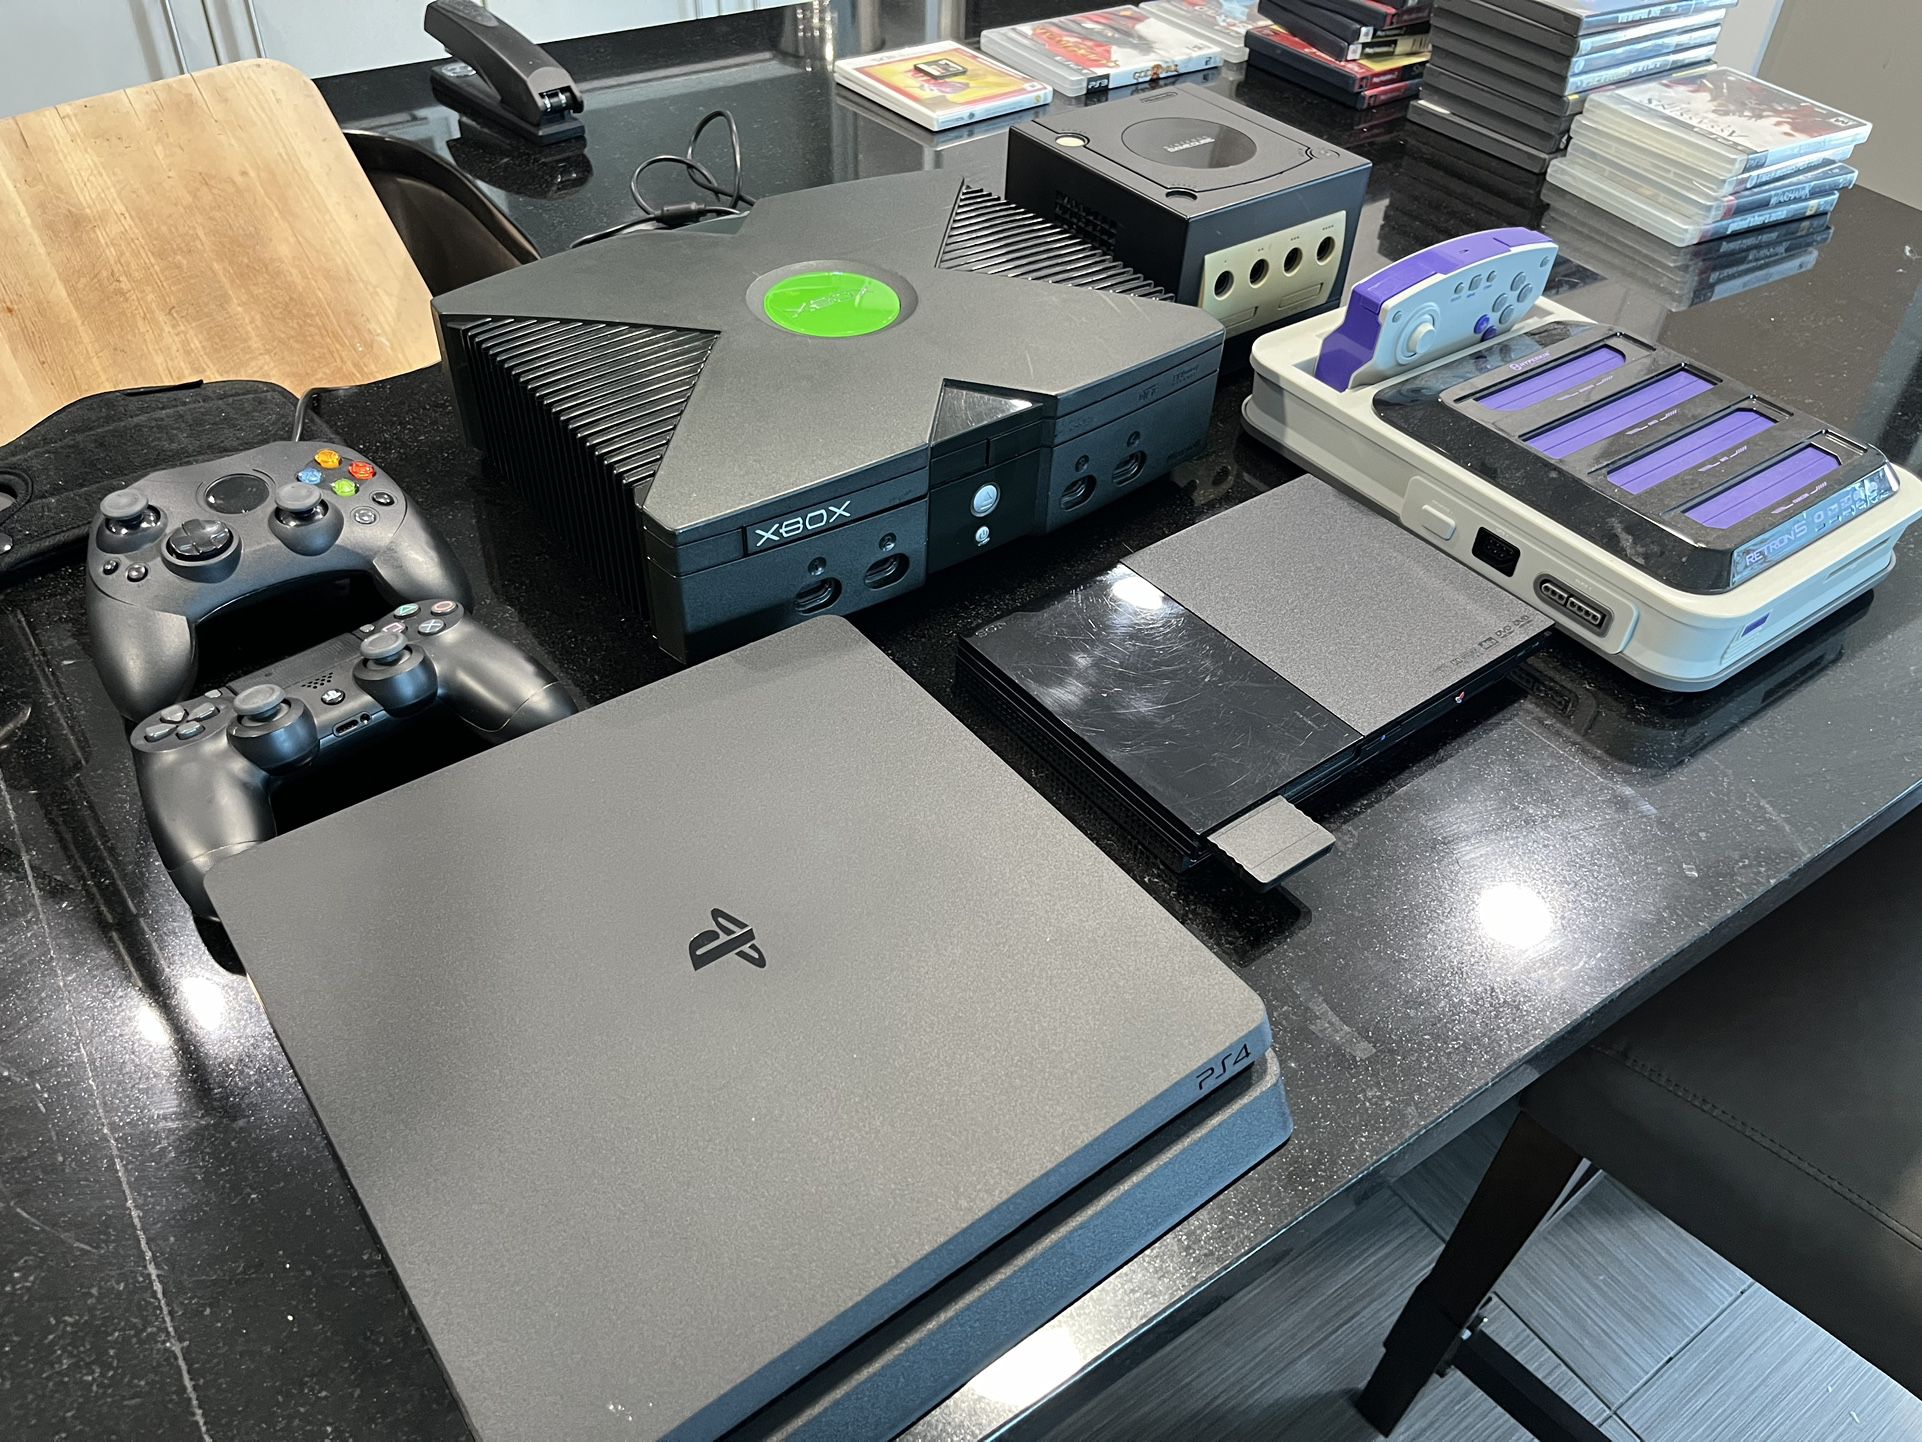 Consoles and vide games for sale - PS2, PS4, Modded Xbox